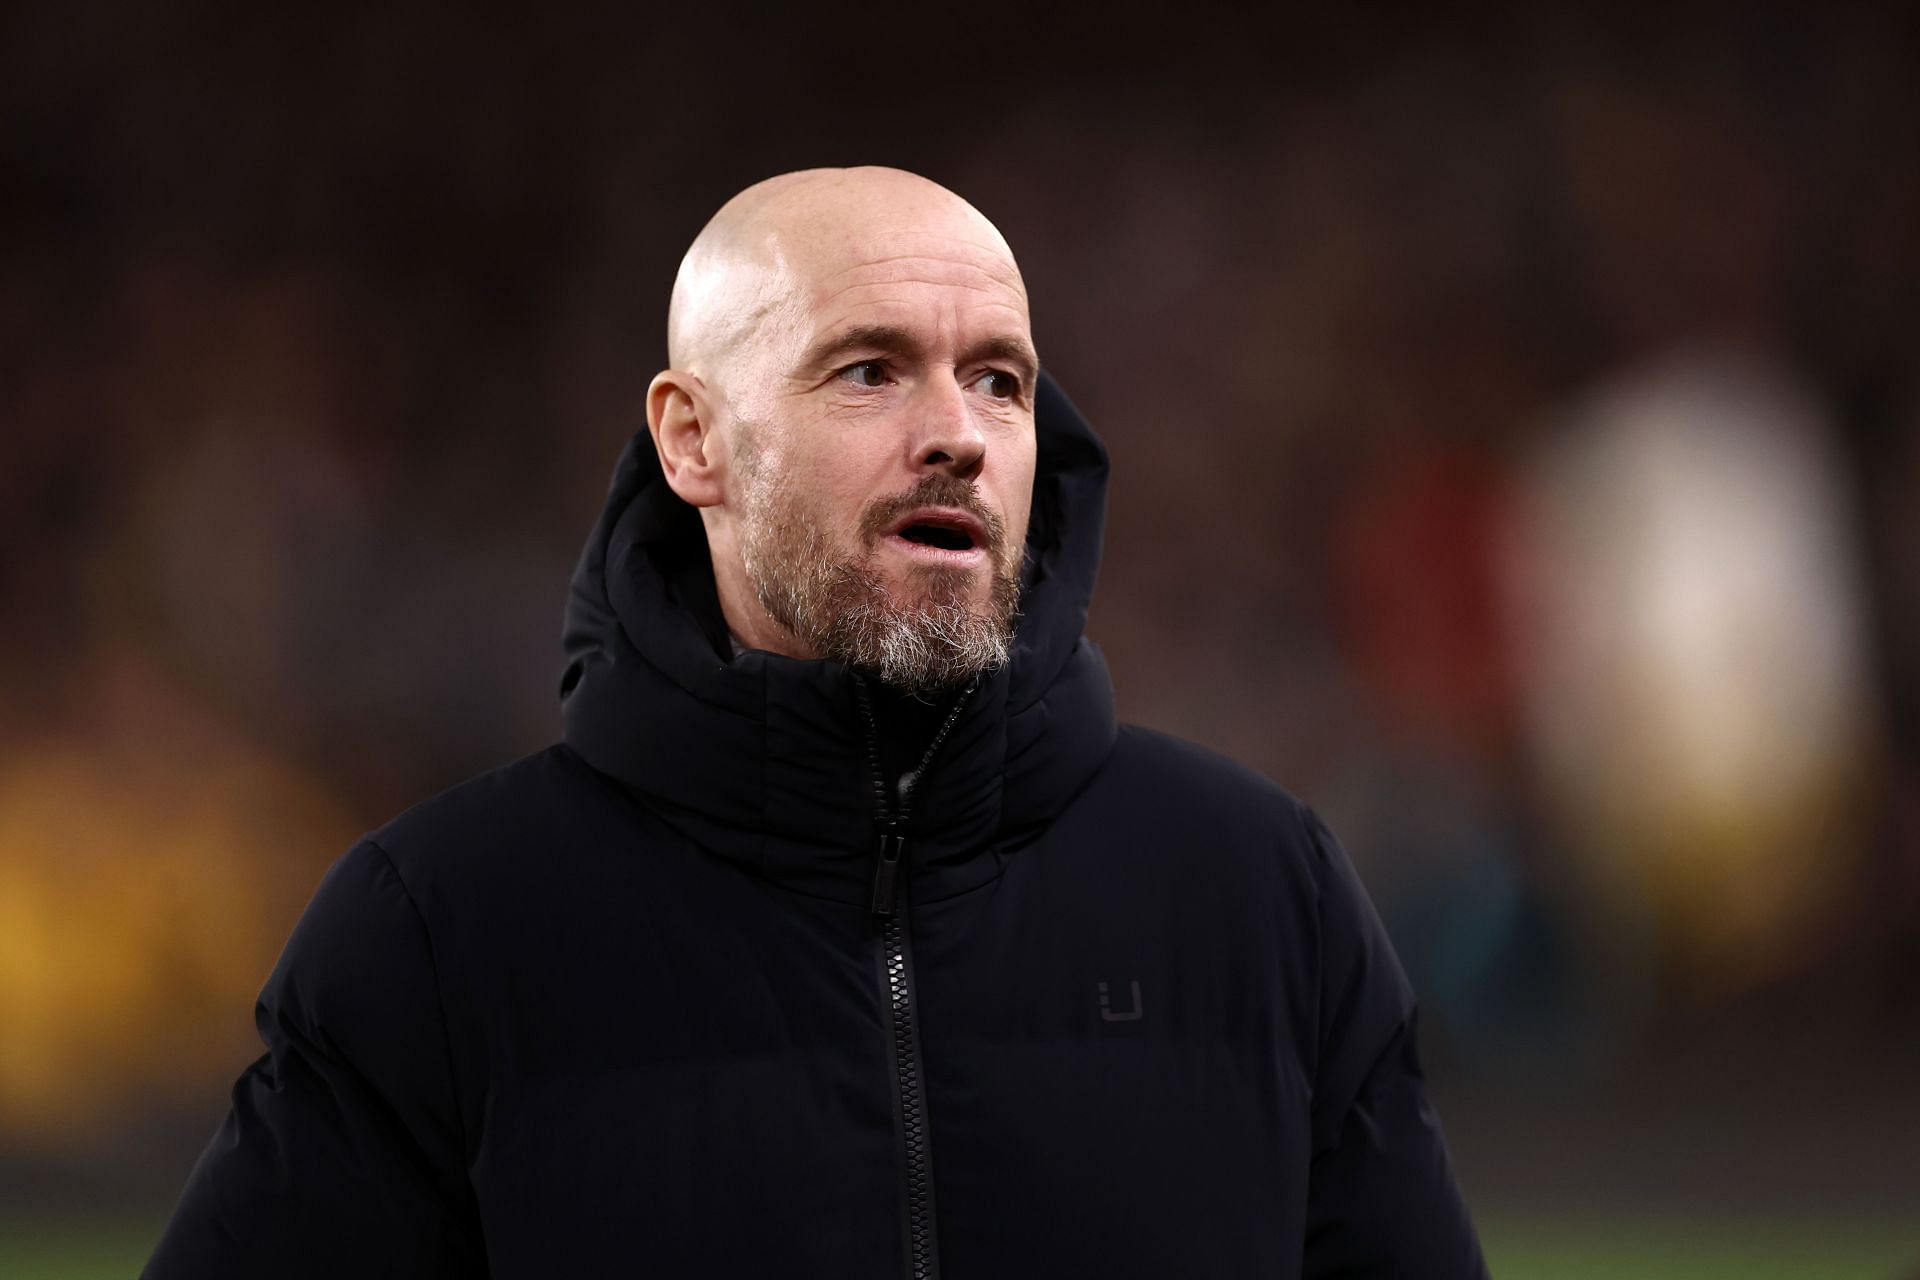 ten Hag has spoken about the upcoming Manchester derby.